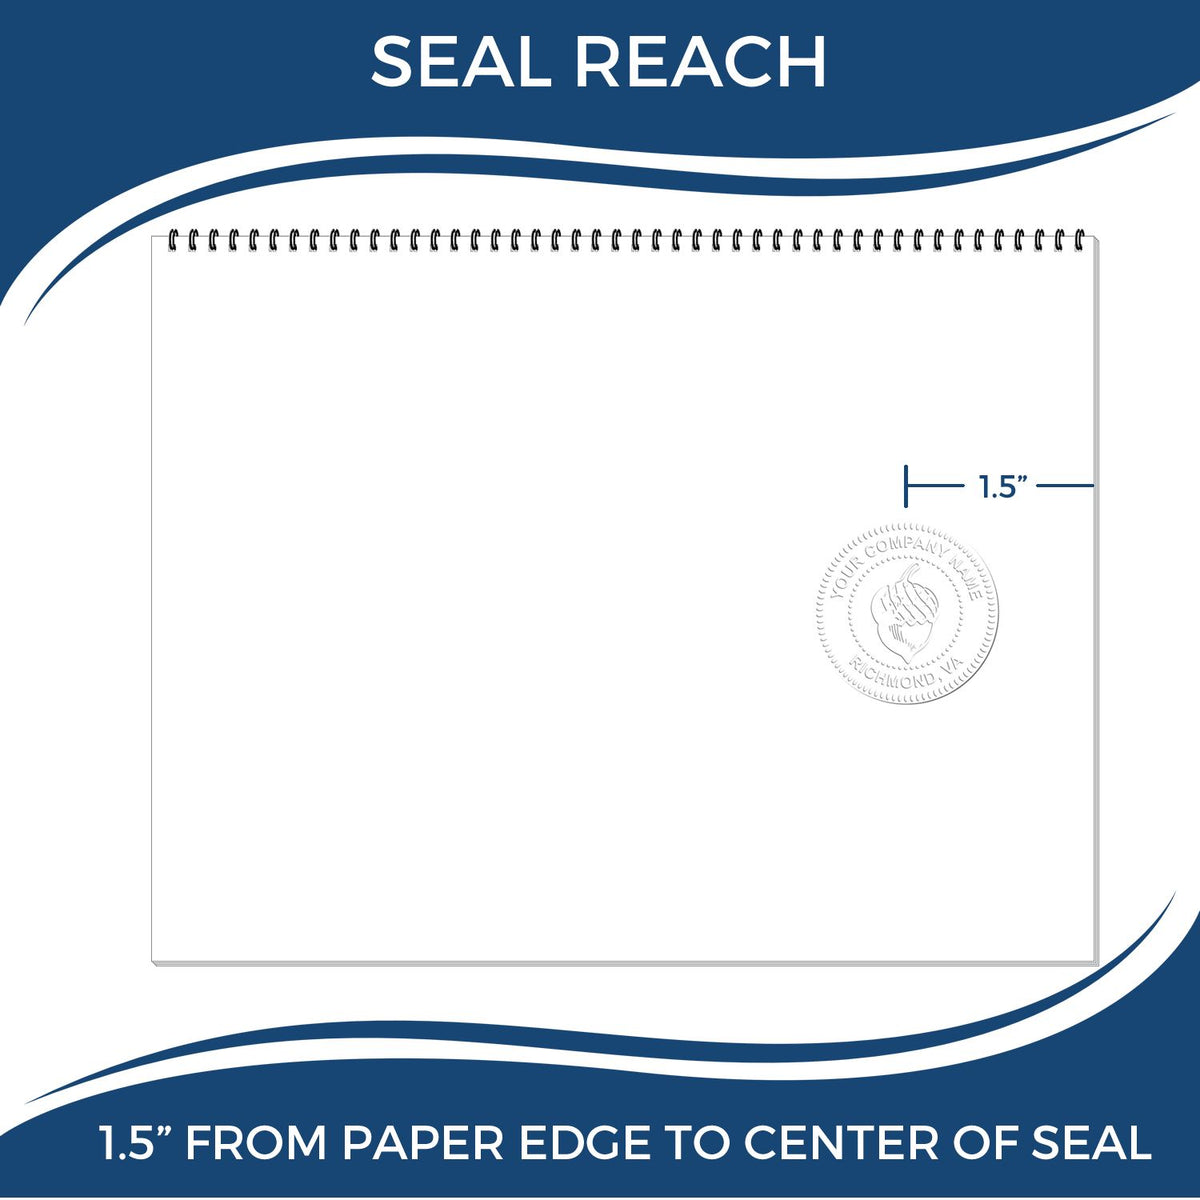 An infographic showing the seal reach which is represented by a ruler and a miniature seal image of the Maryland Geologist Desk Seal